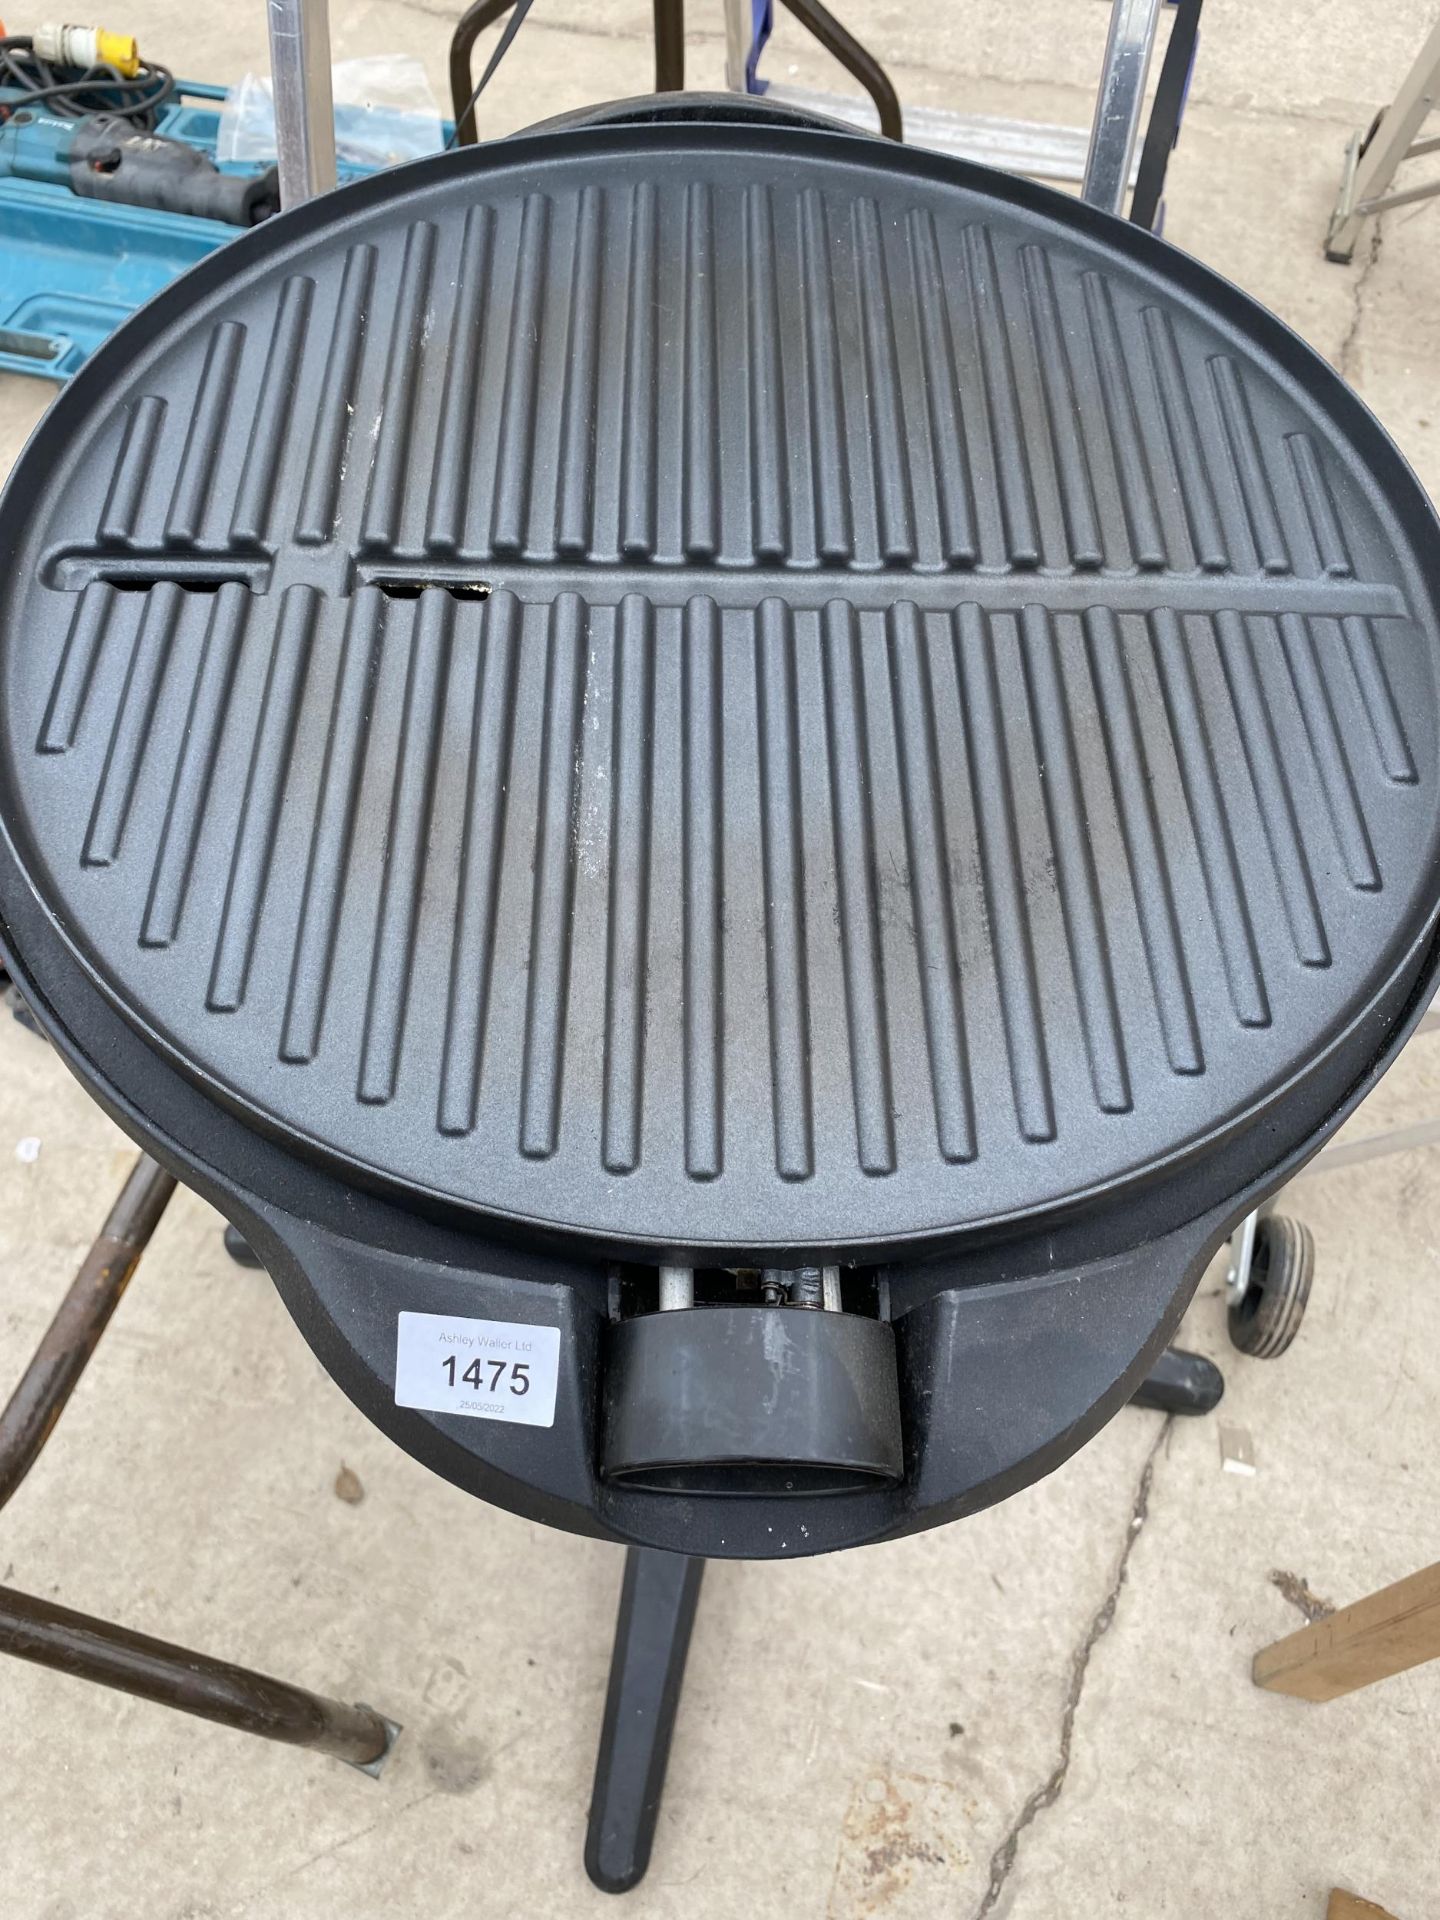 A GEORGE FORMAN ELECTRIC BBQ/GRILL - Image 3 of 5